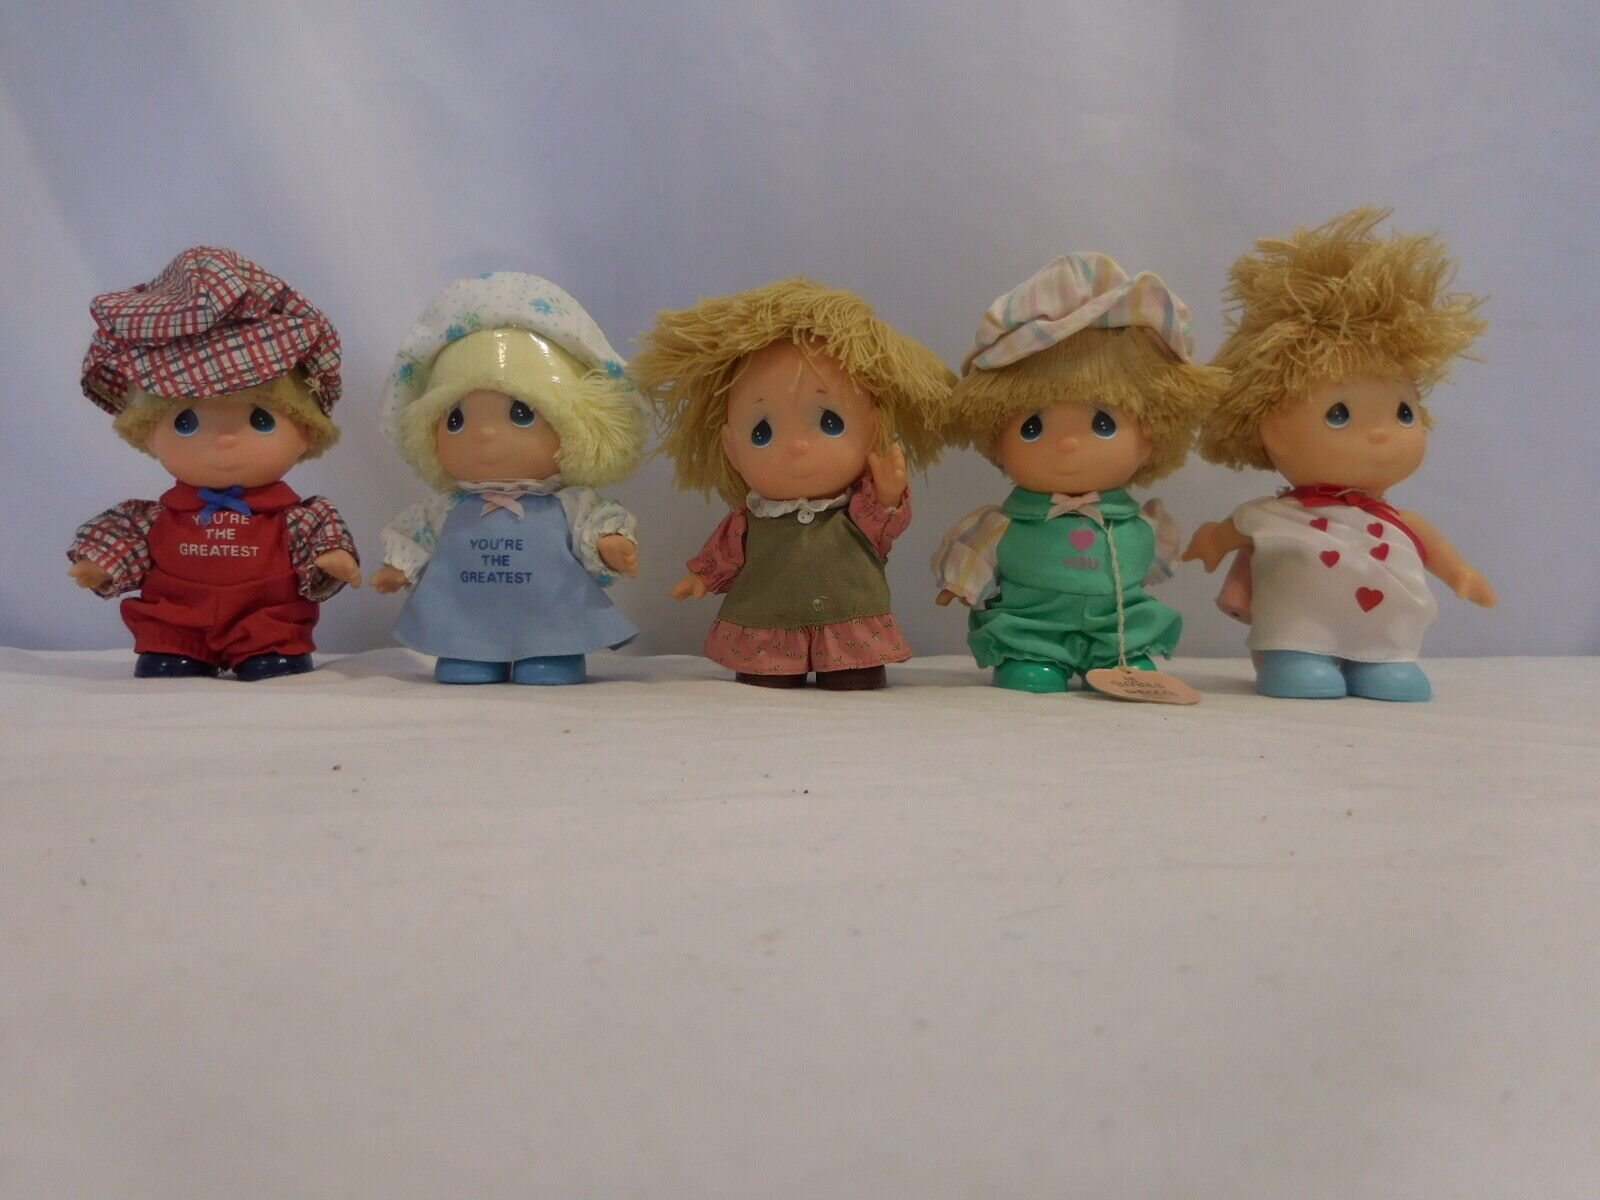 Precious Moments HI Babies set of 5 Dolls in Outfits 1980's Vintage + Tags - $44.56